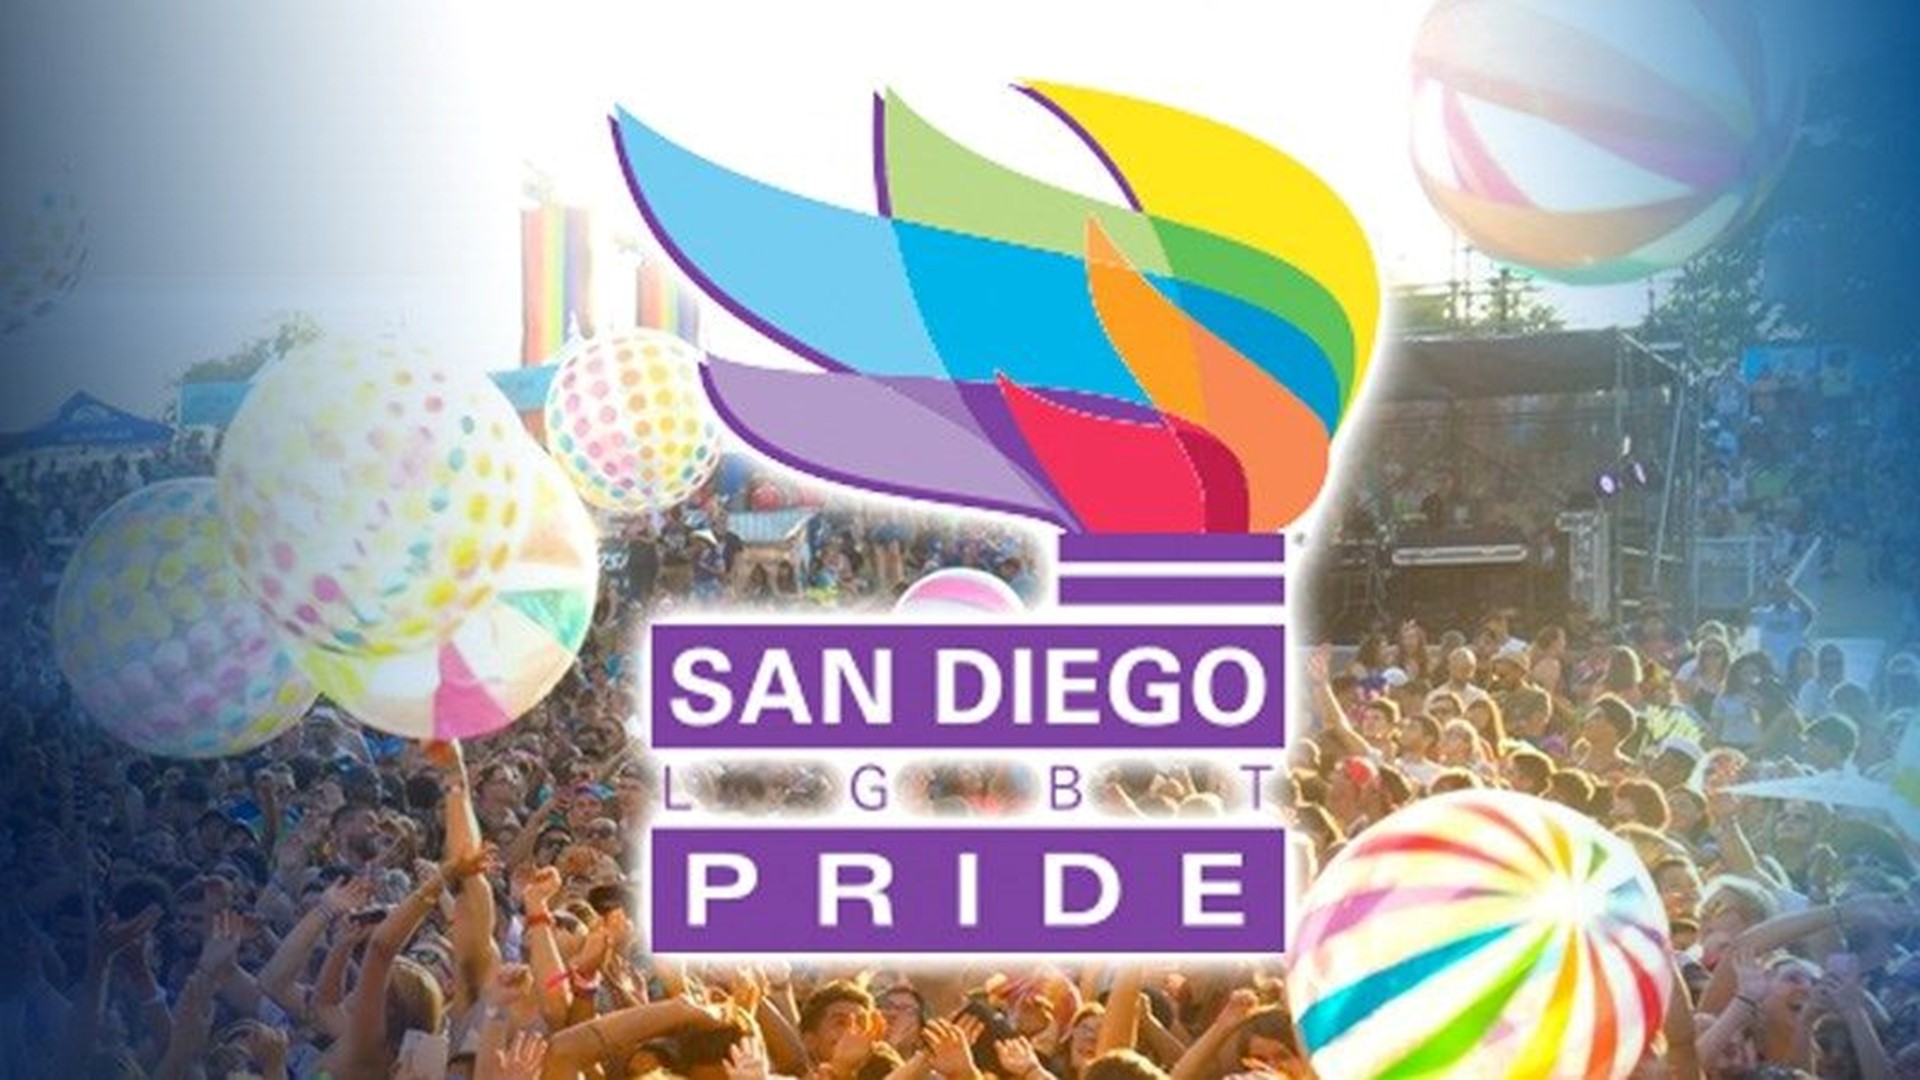 San Diego Pride to donate more than 170,000 to LGBTQ organizations